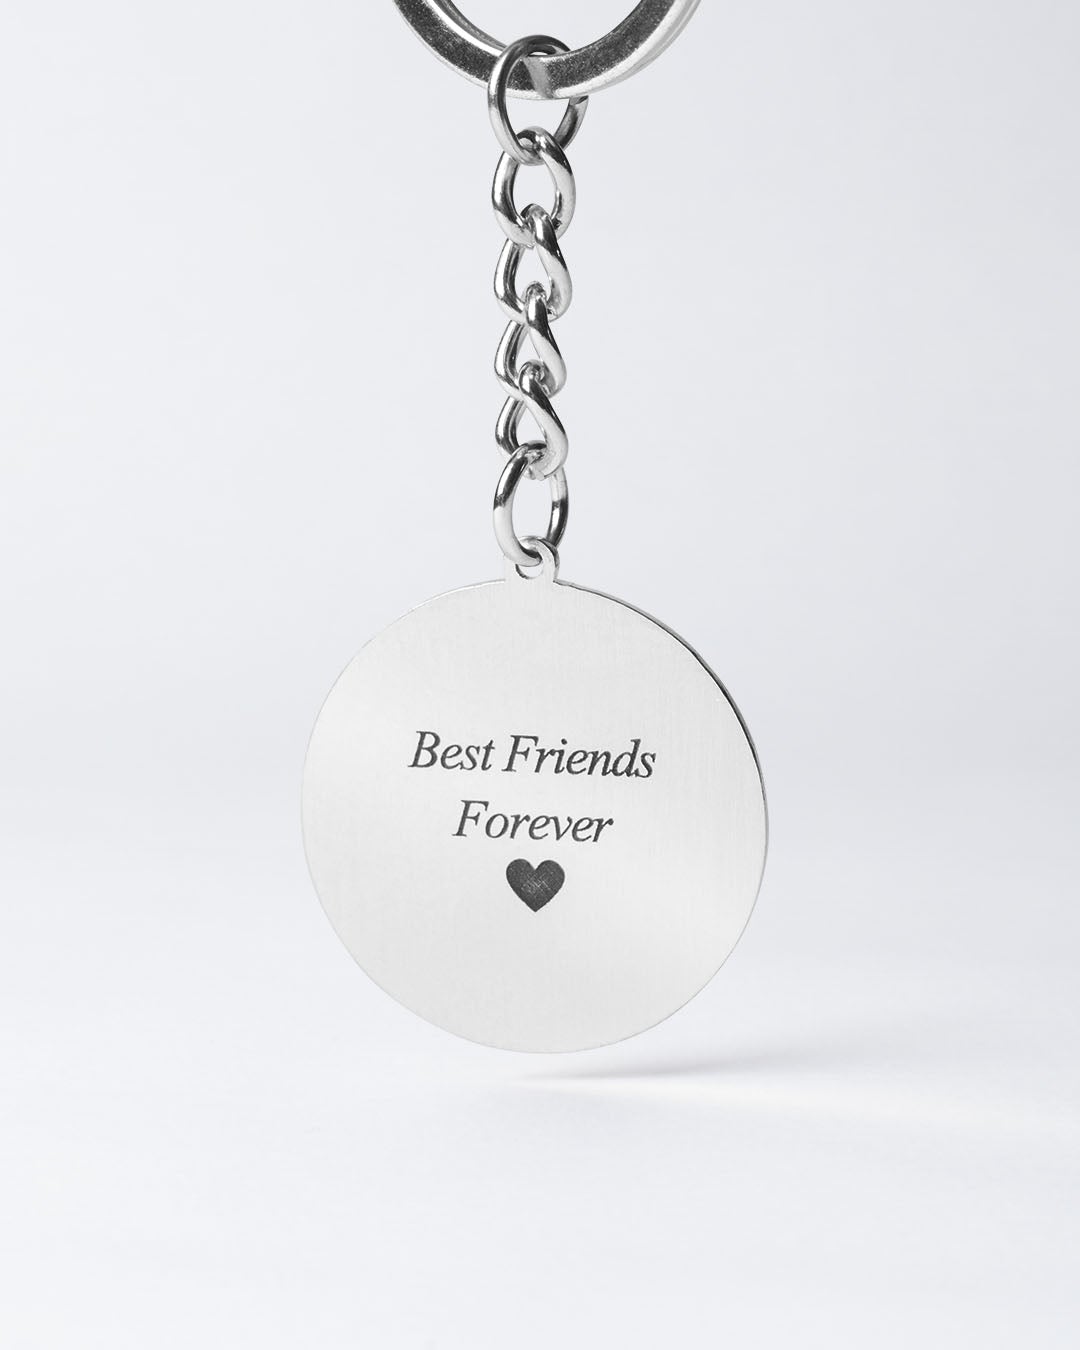 Dog memorial gifts, silver medallion dog keychain engraving